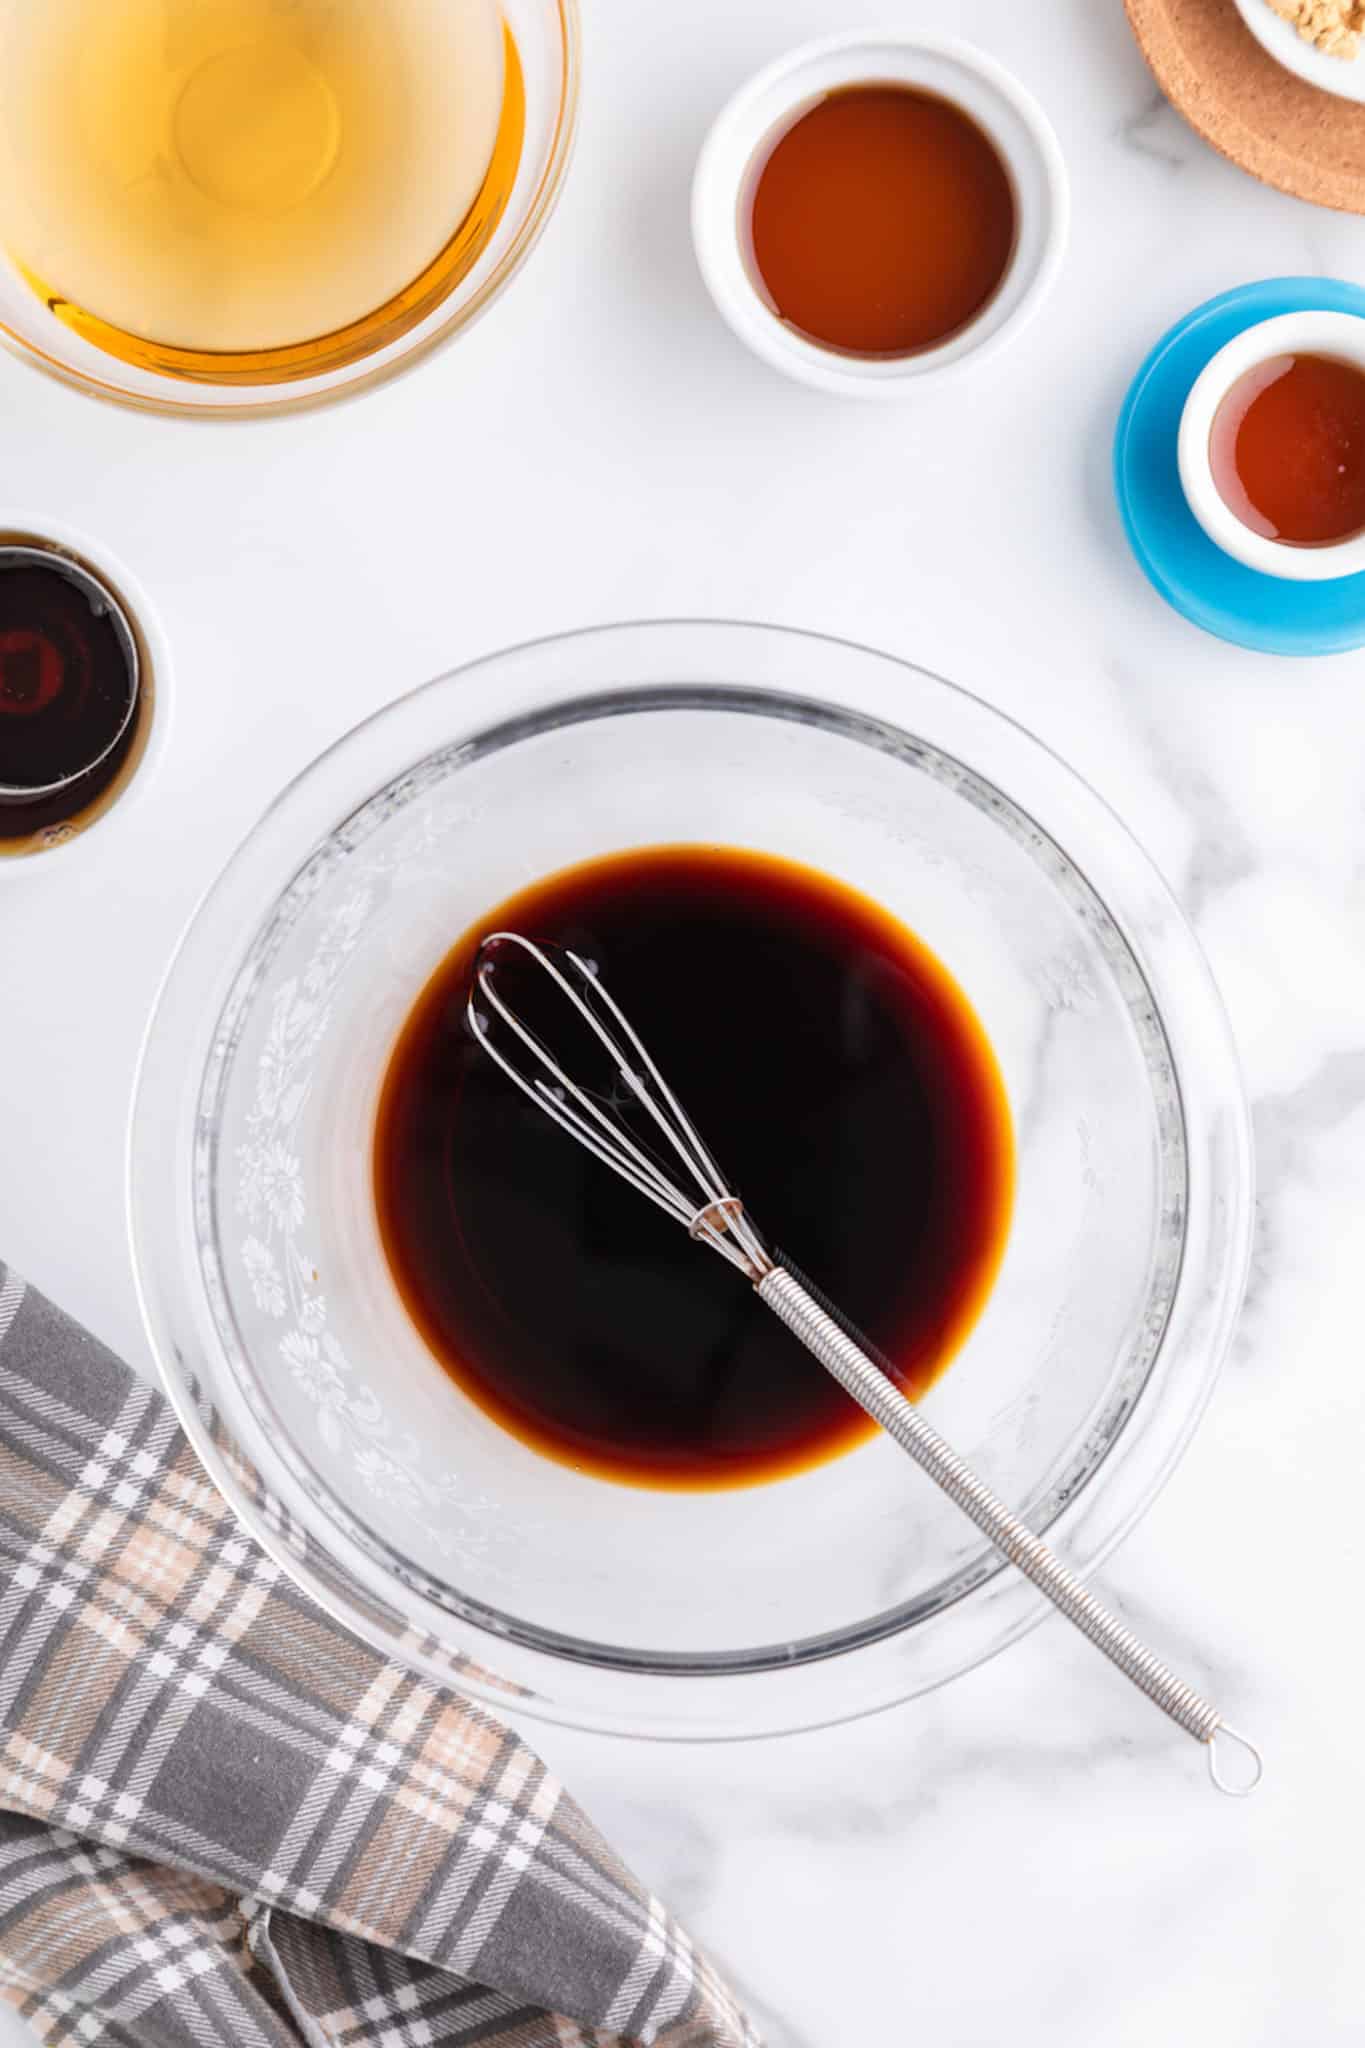 A small silver whisk in a glass bowl of soy sauce.